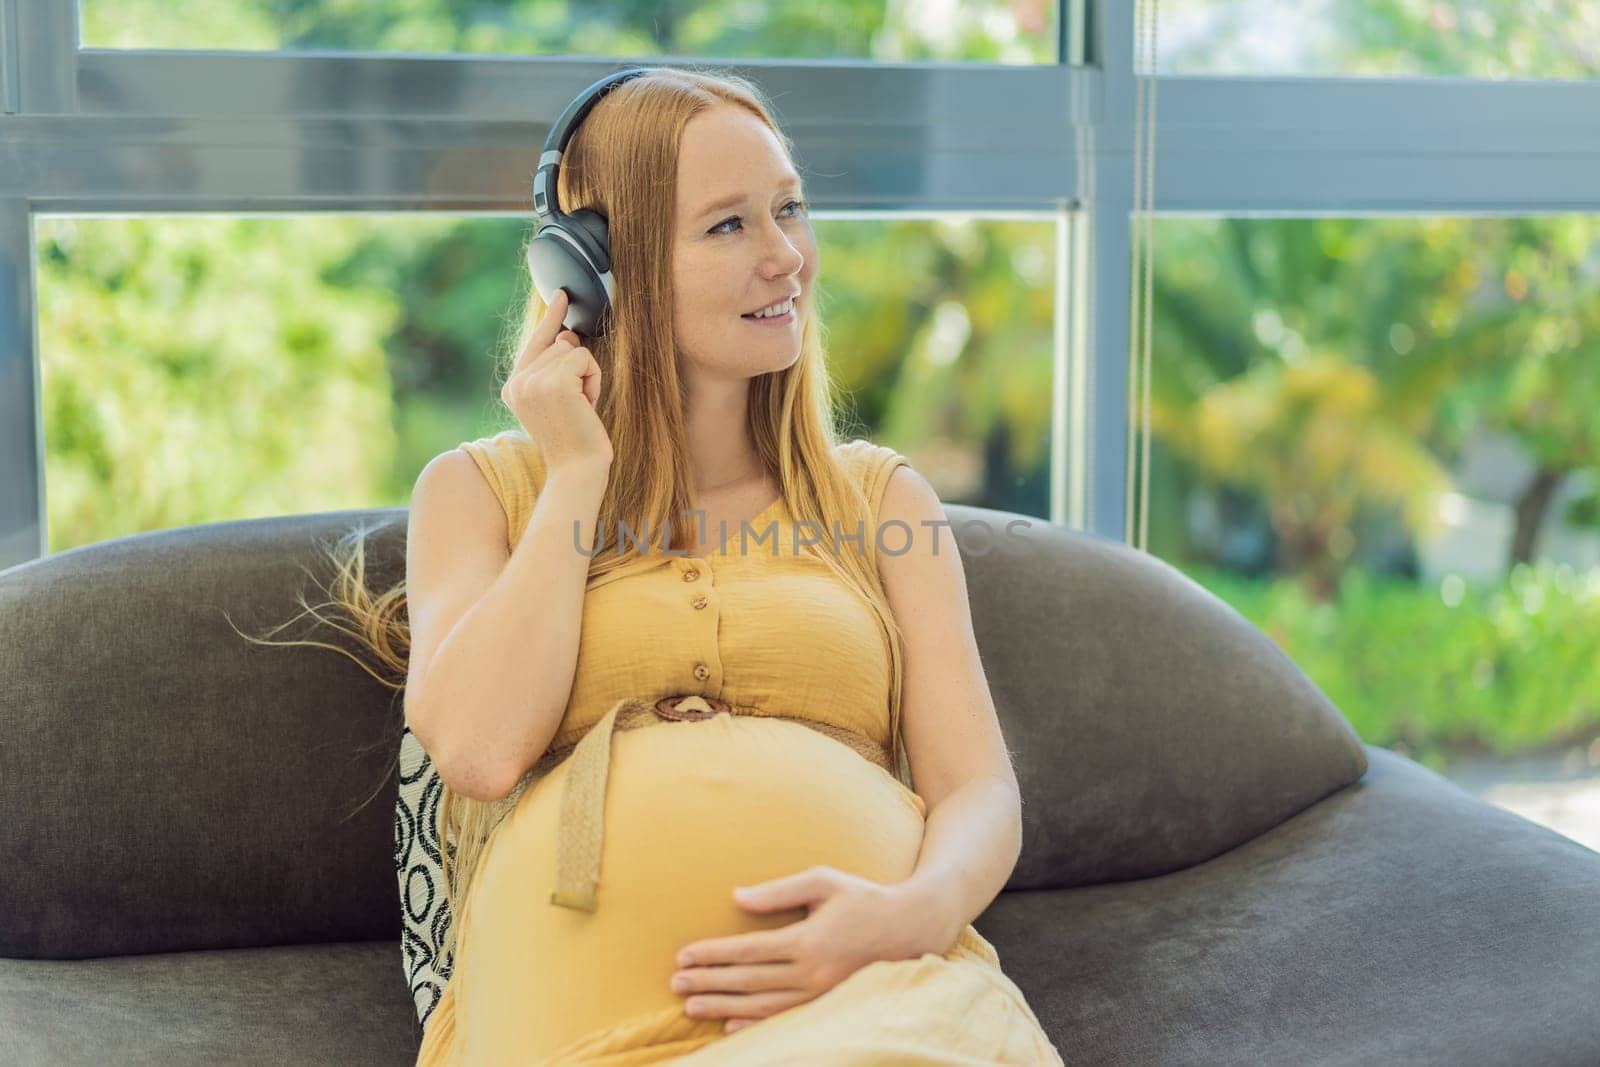 Expectant mom finds joy in her pregnancy, listening to soothing music for a serene and harmonious connection with her unborn baby by galitskaya